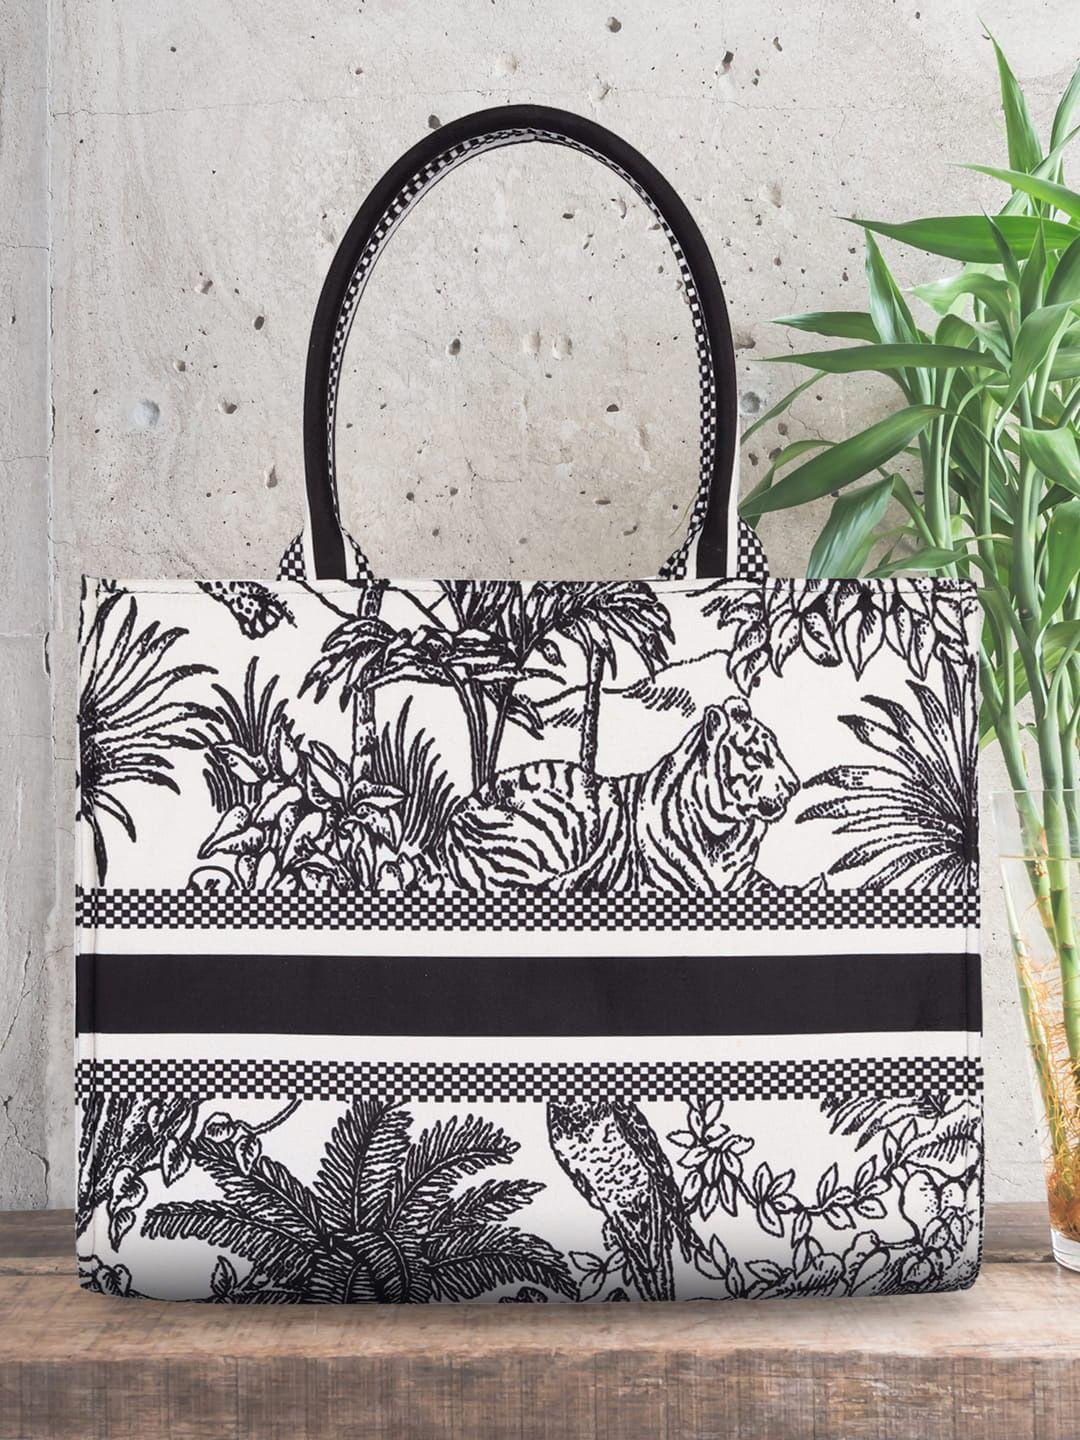 mini wesst printed structured tote bag